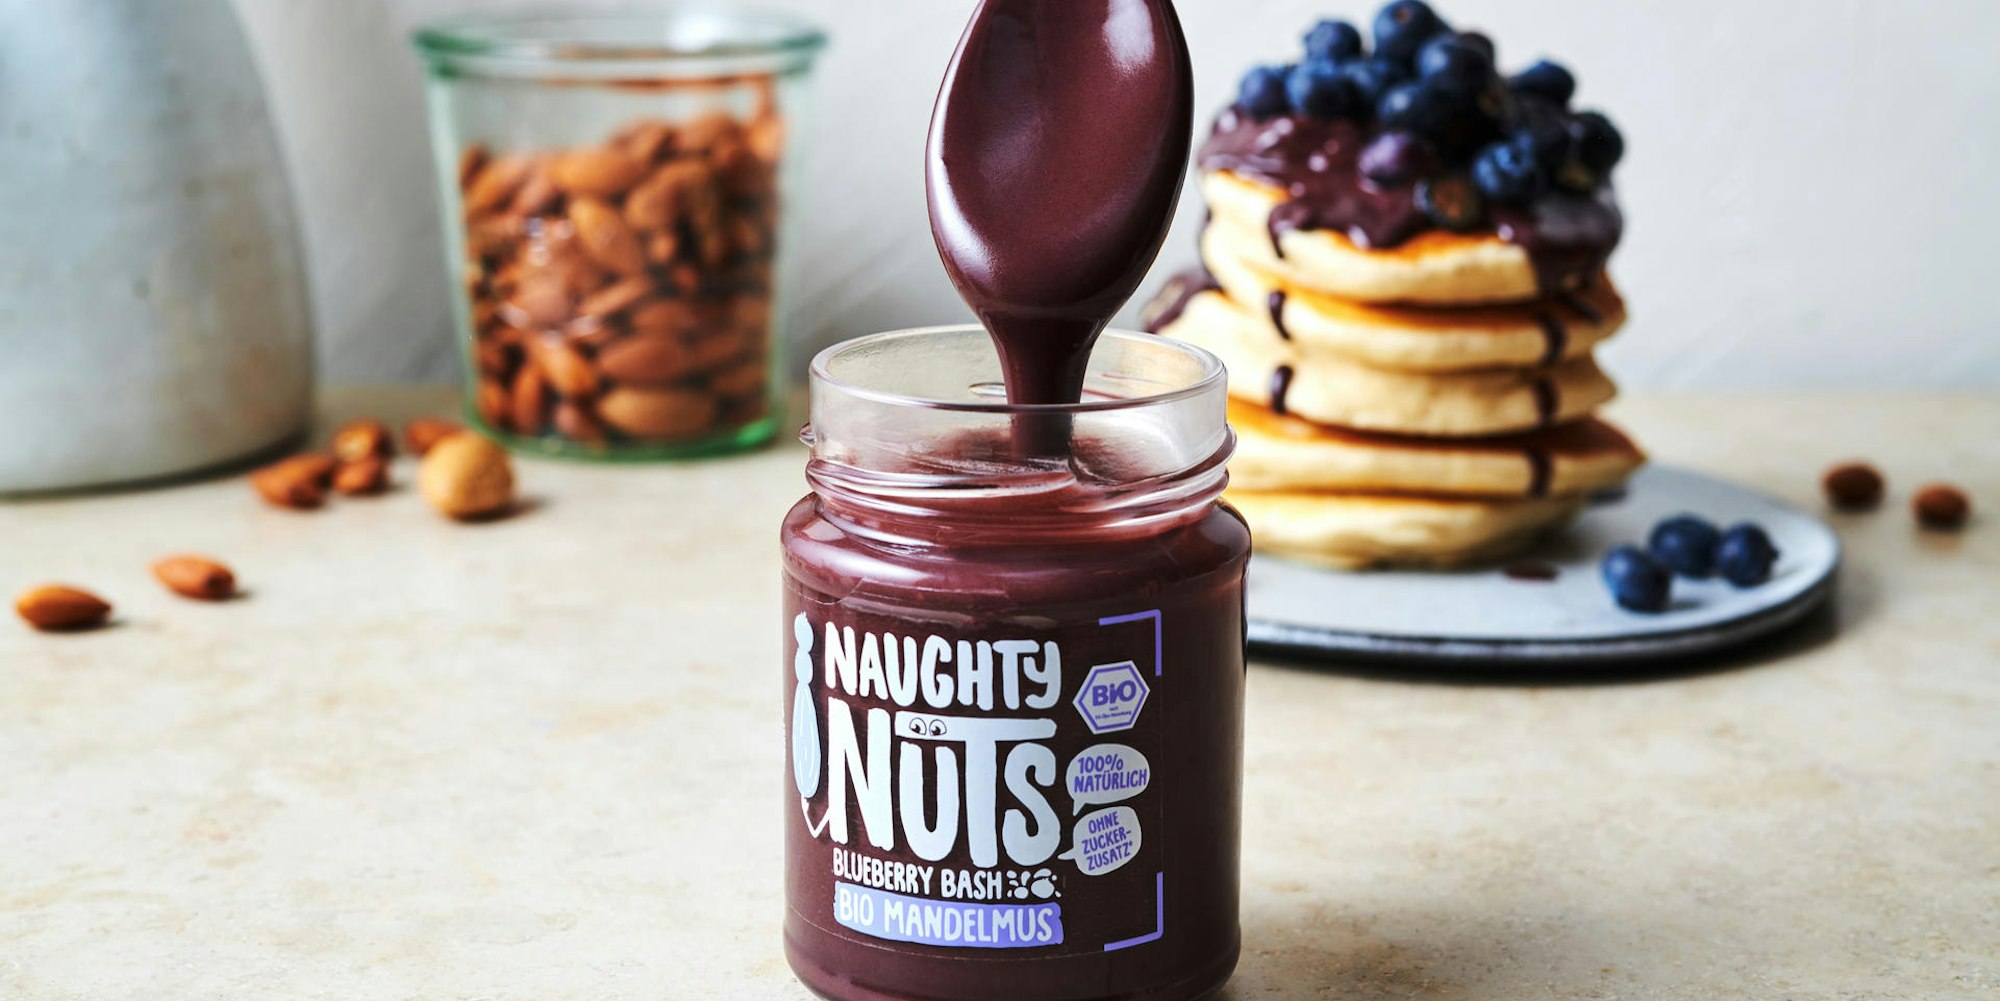 Naughty Nuts Blueberry Bash